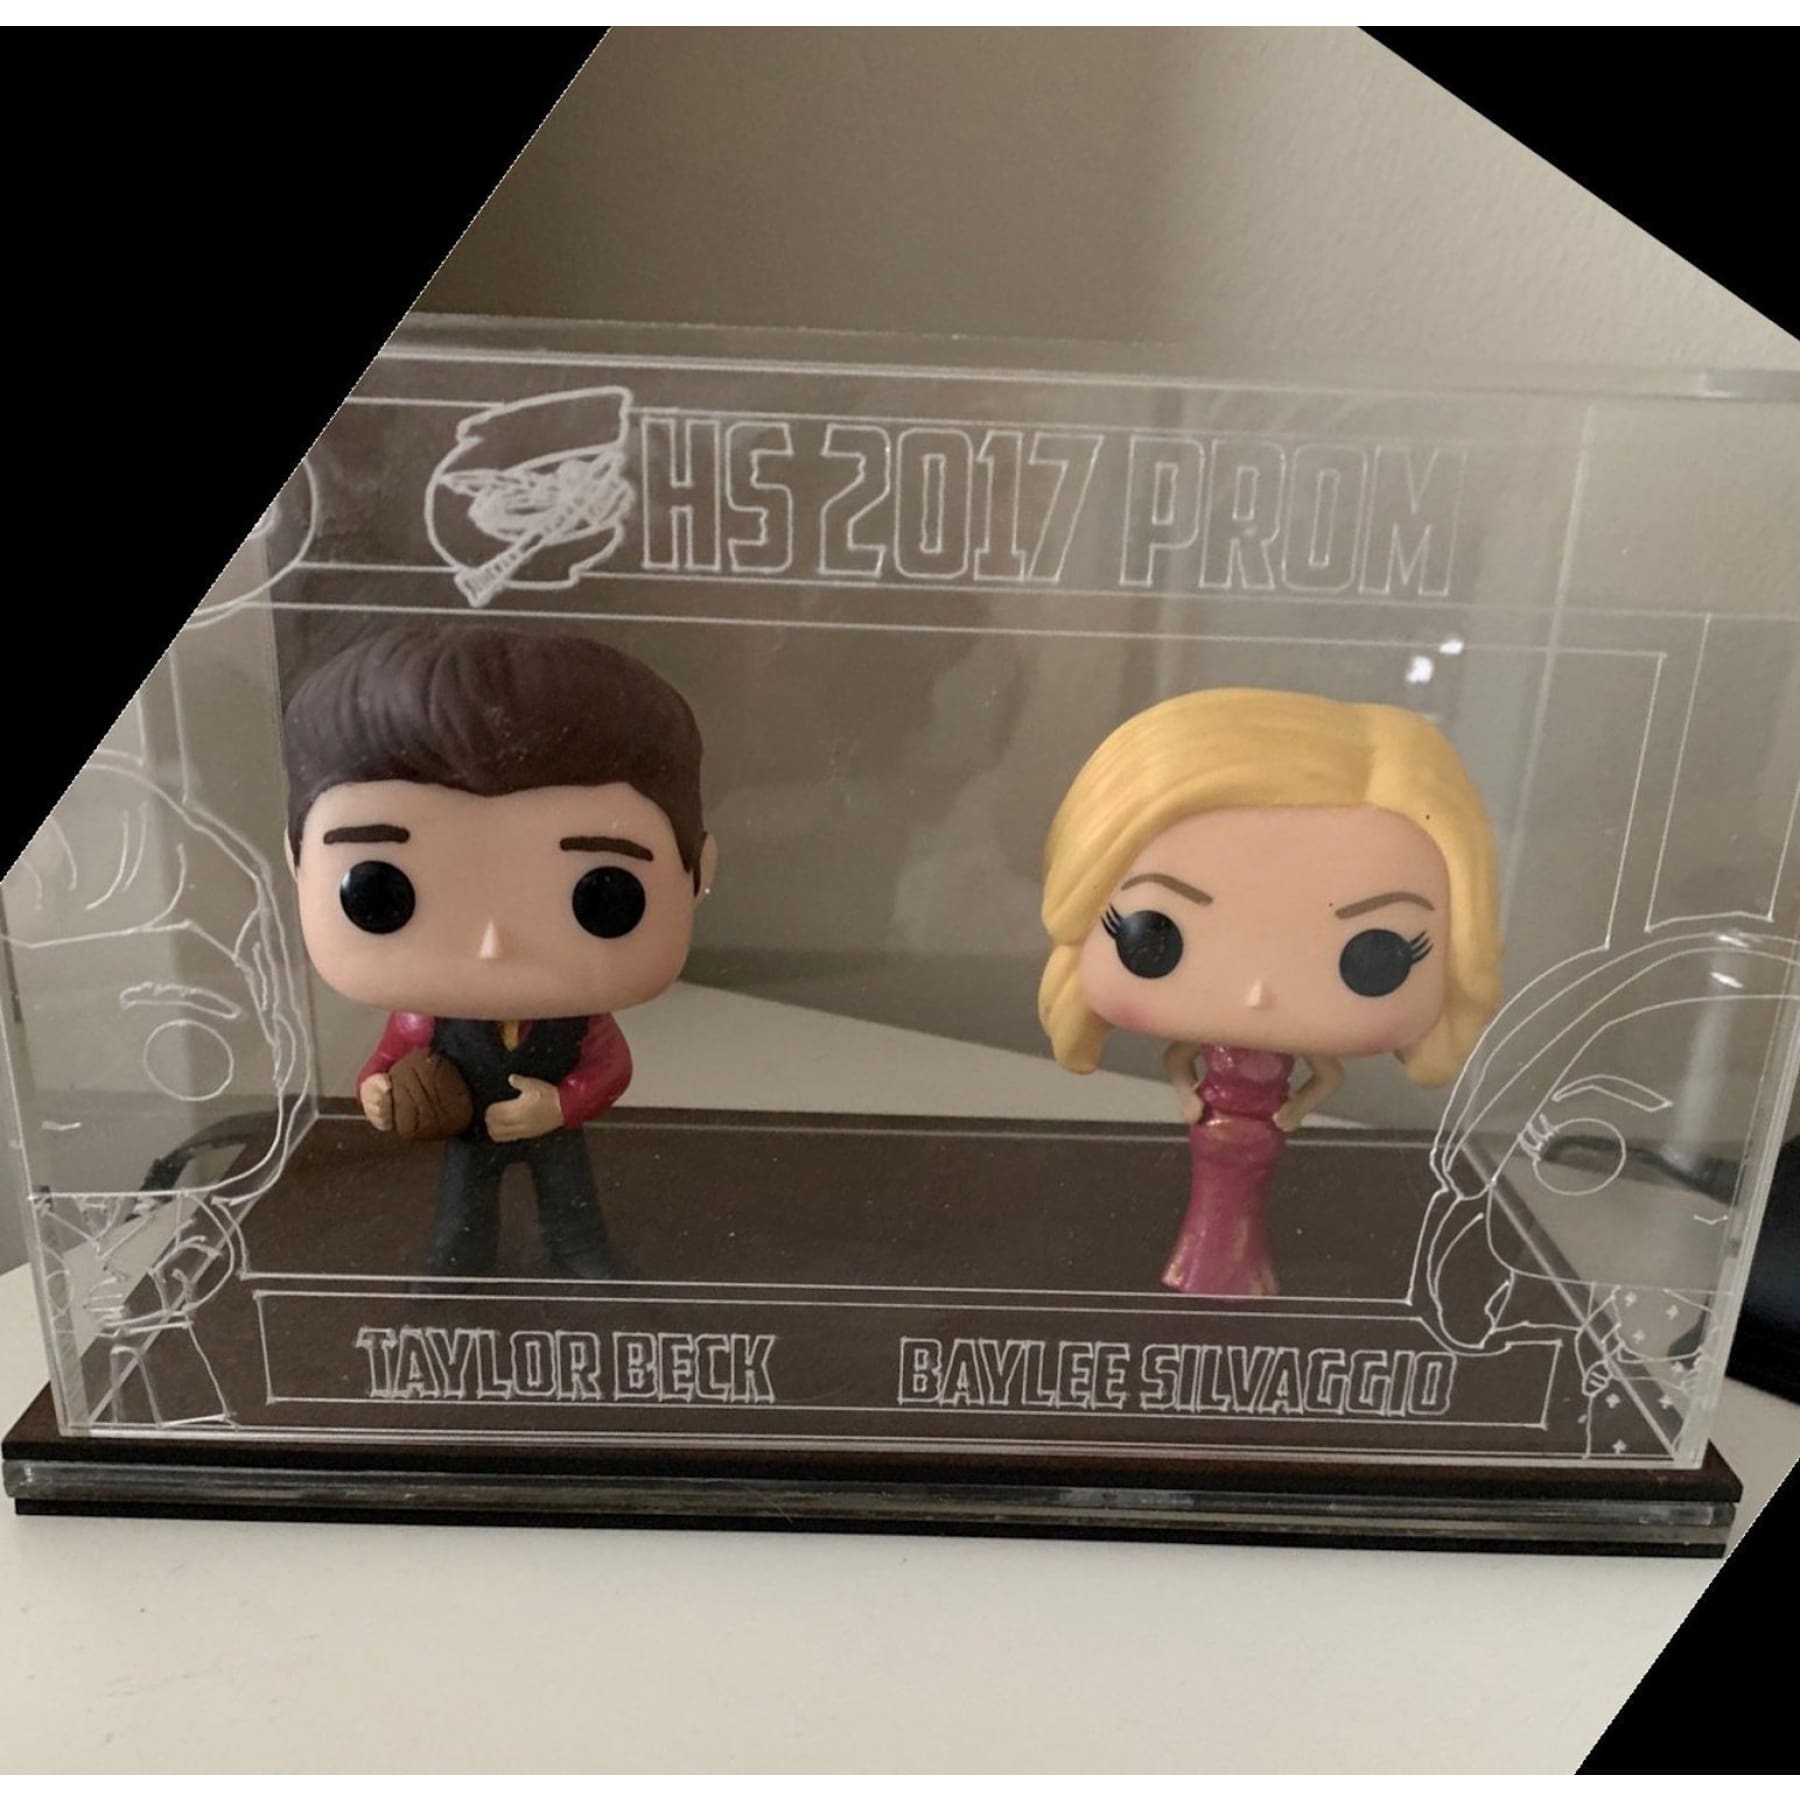 Acrylic LED Display Case for 2 Unboxed Funko Pop, custom made